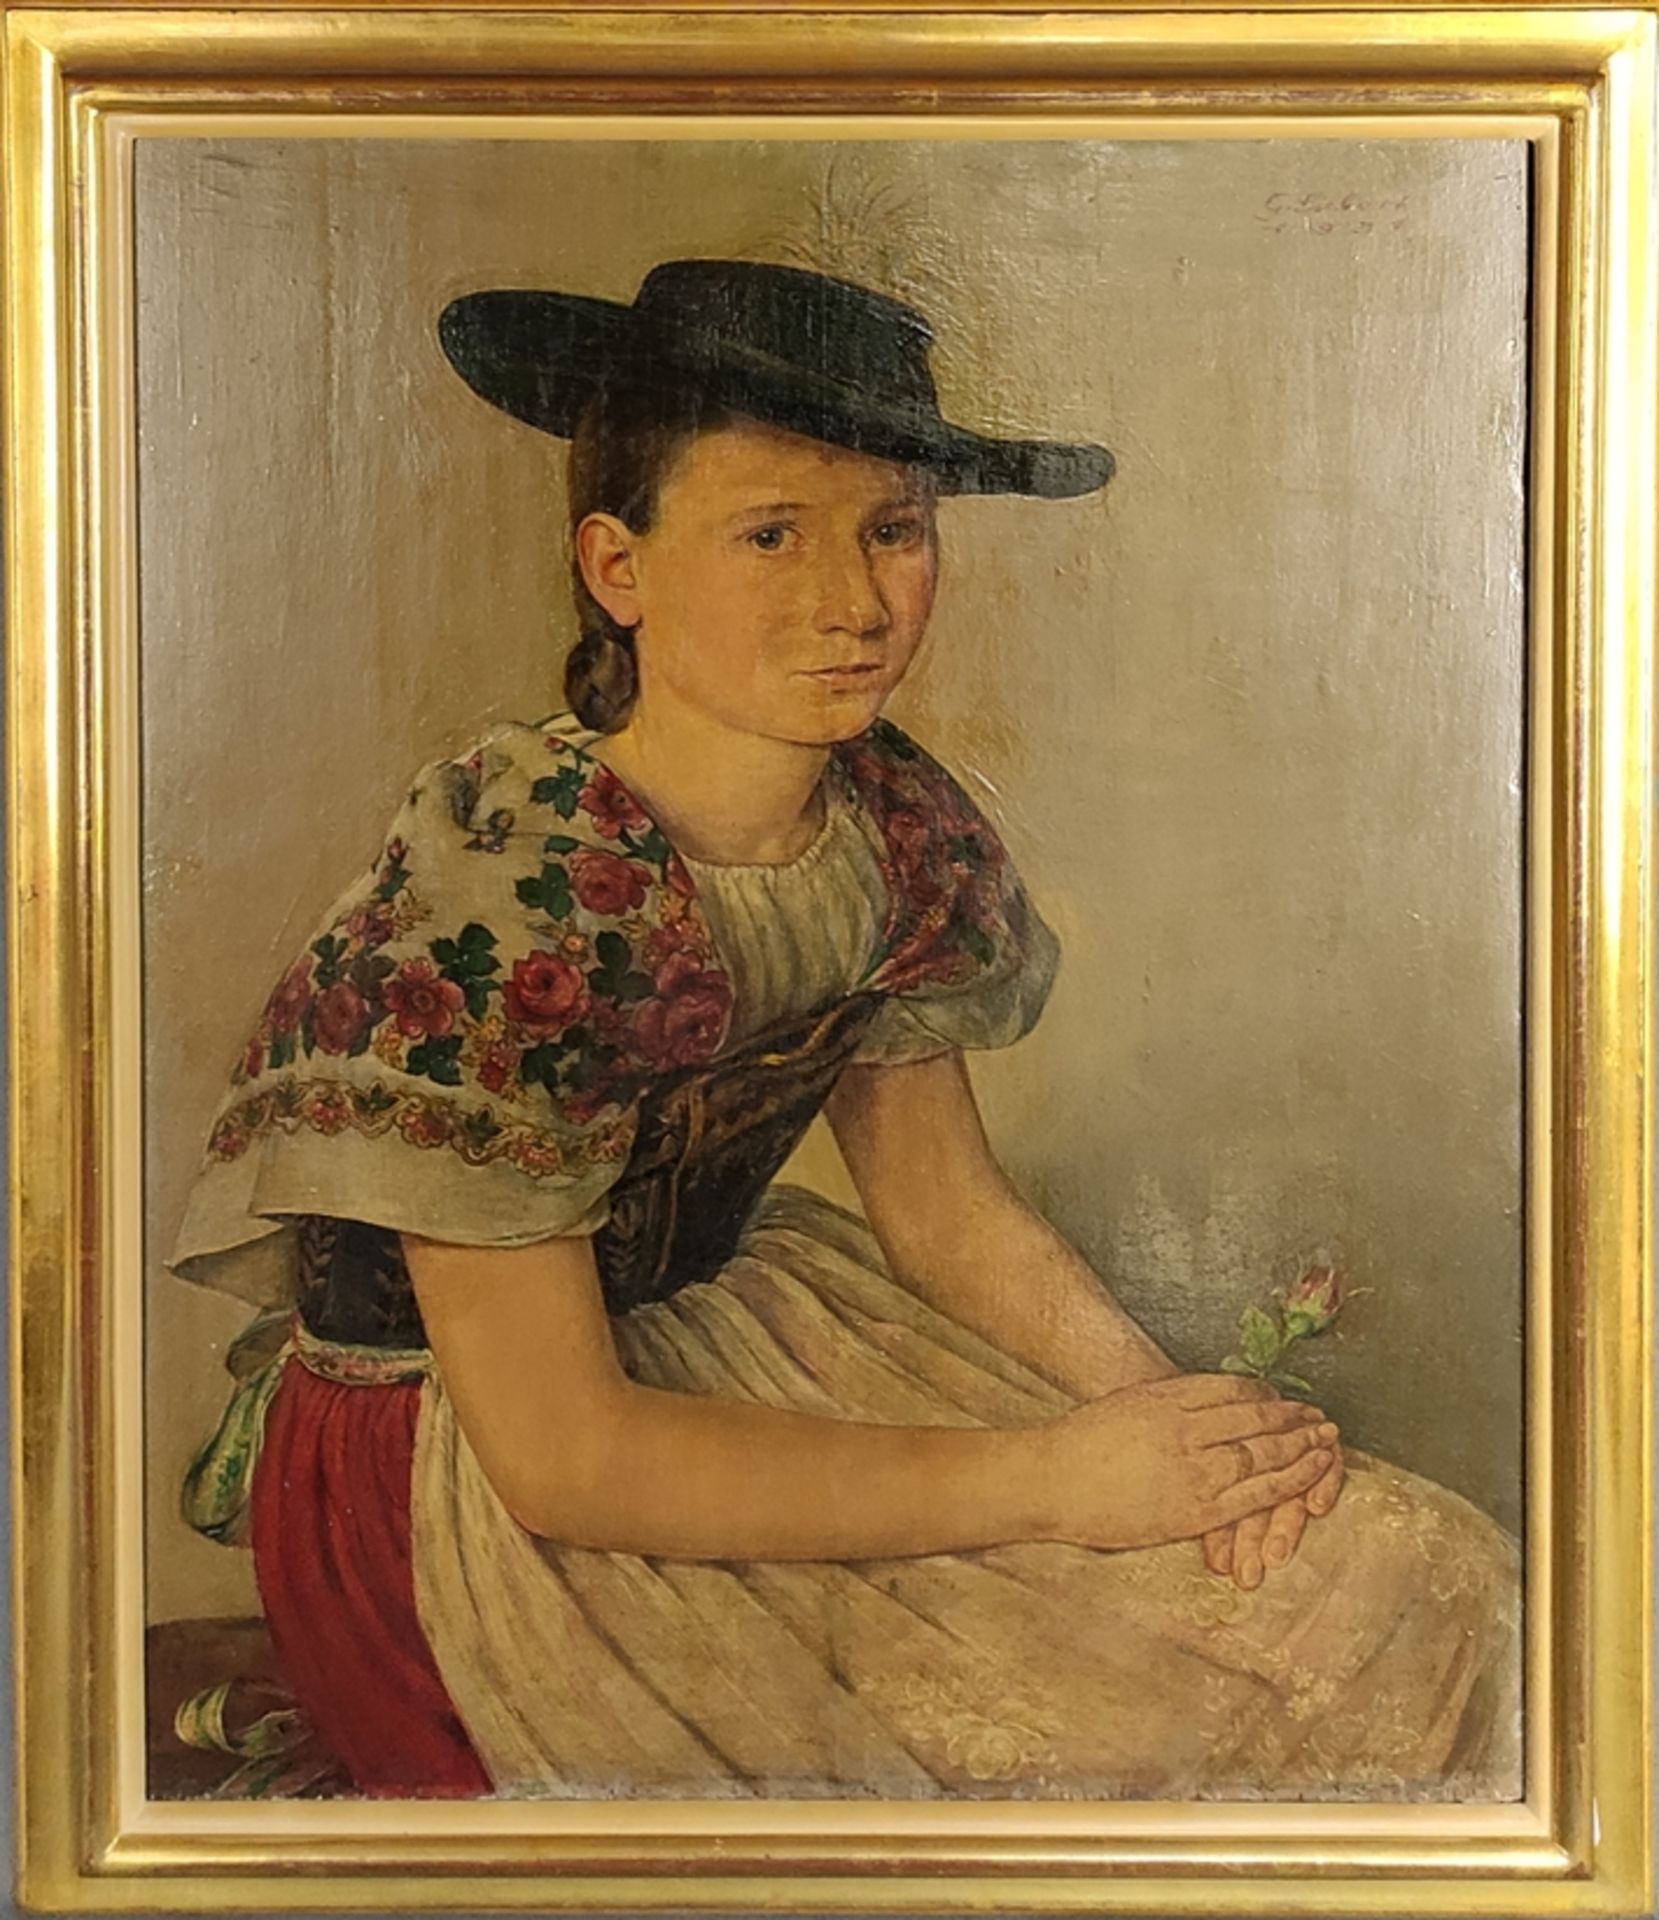 Siebert, Georg (1896 Dresden - 1984 Cologne) "In Tyrolean Costume", girl sitting with rose in her h - Image 2 of 4